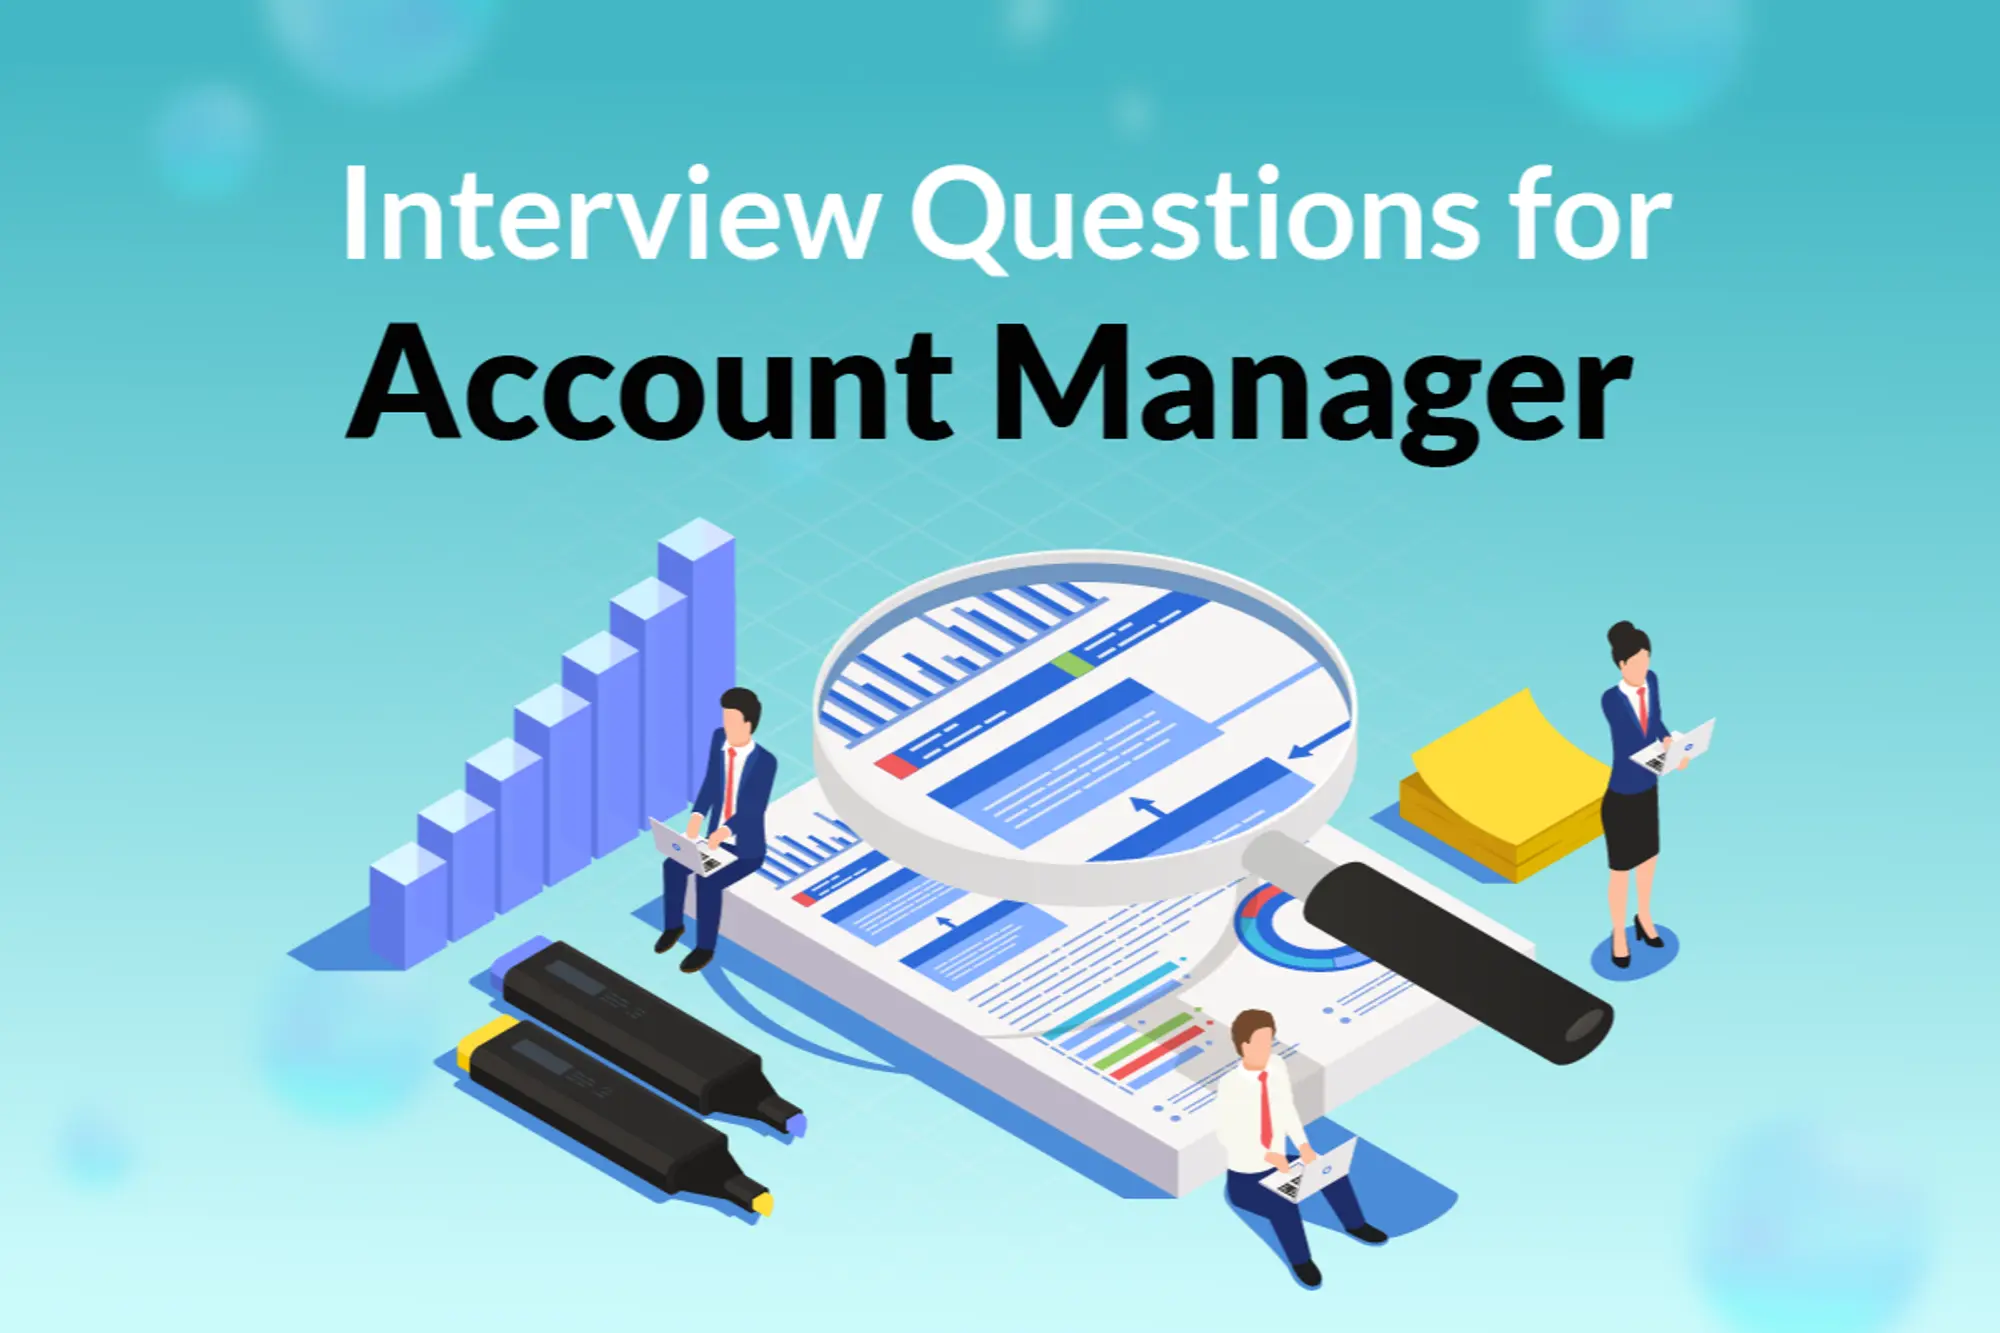 Interview Questions for an Account Manager